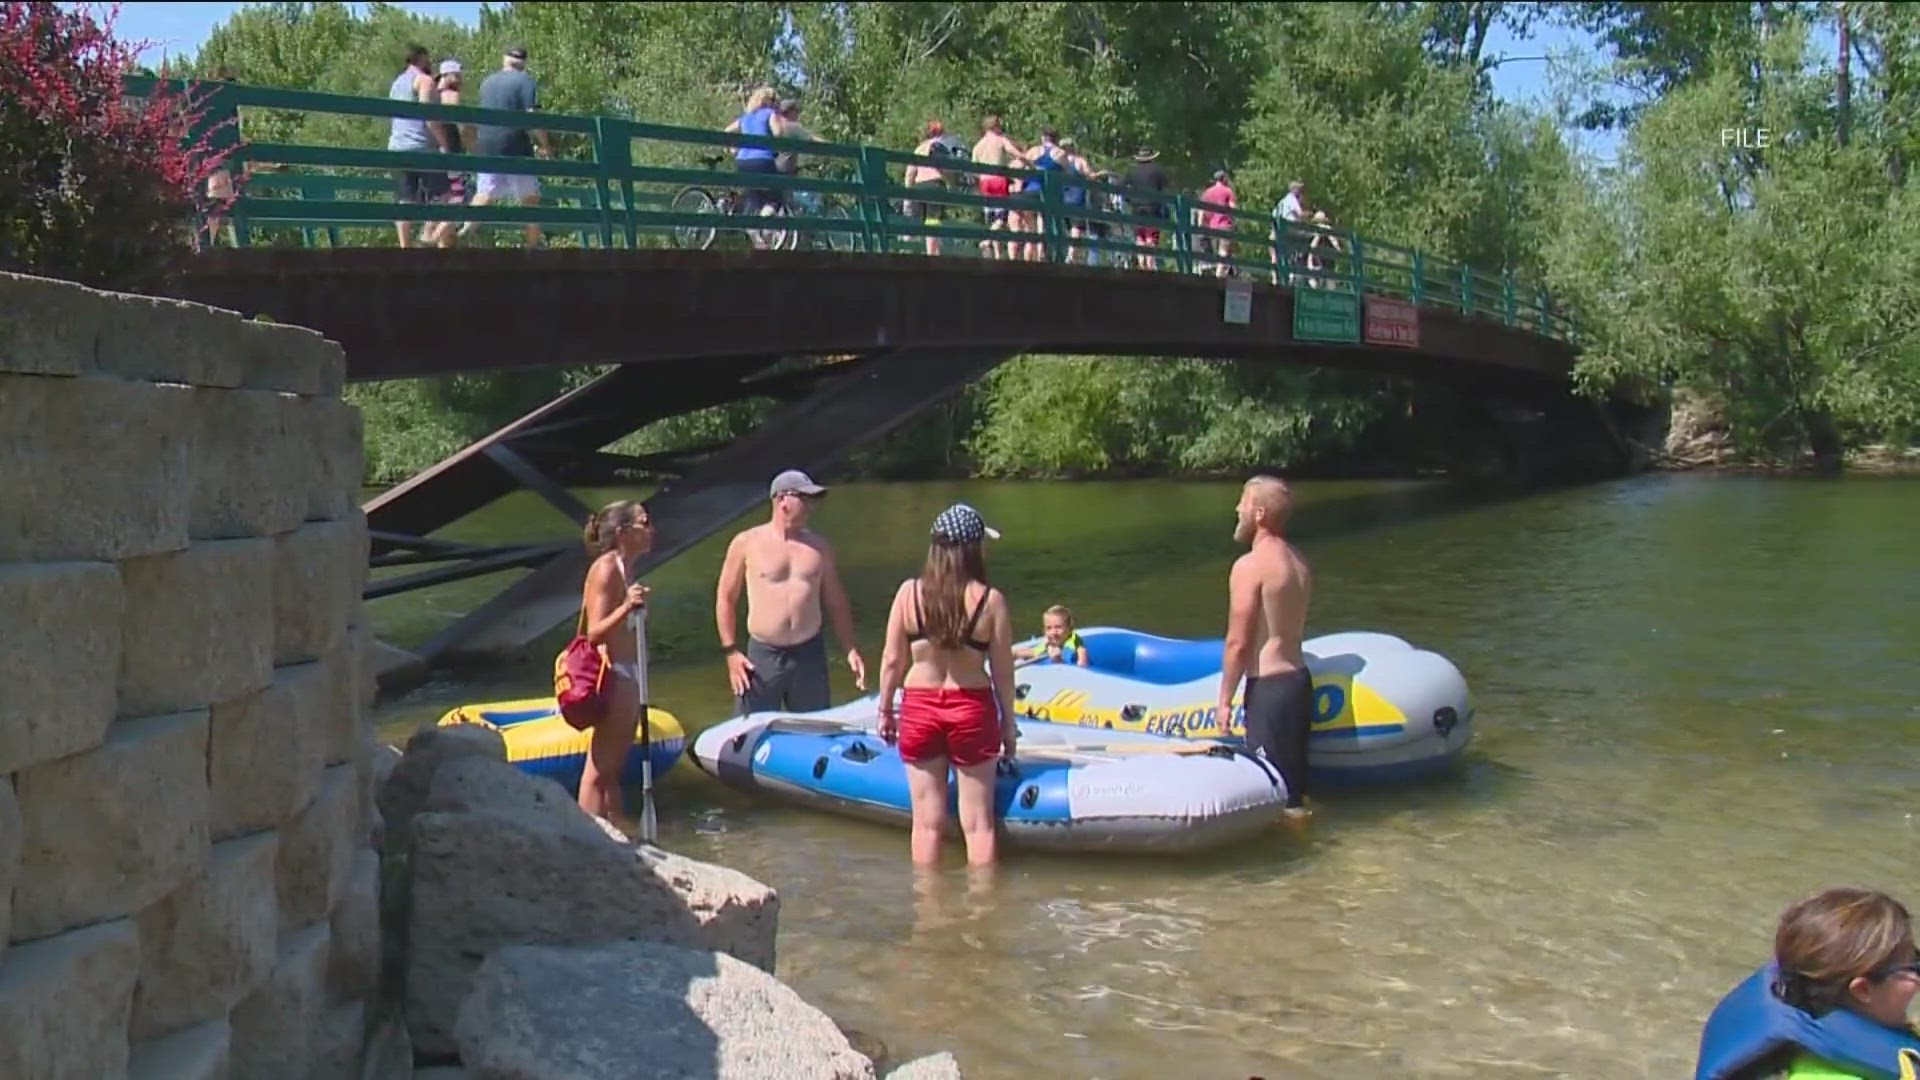 Raft and tube rentals will be available at the put-in area at Barber Park.